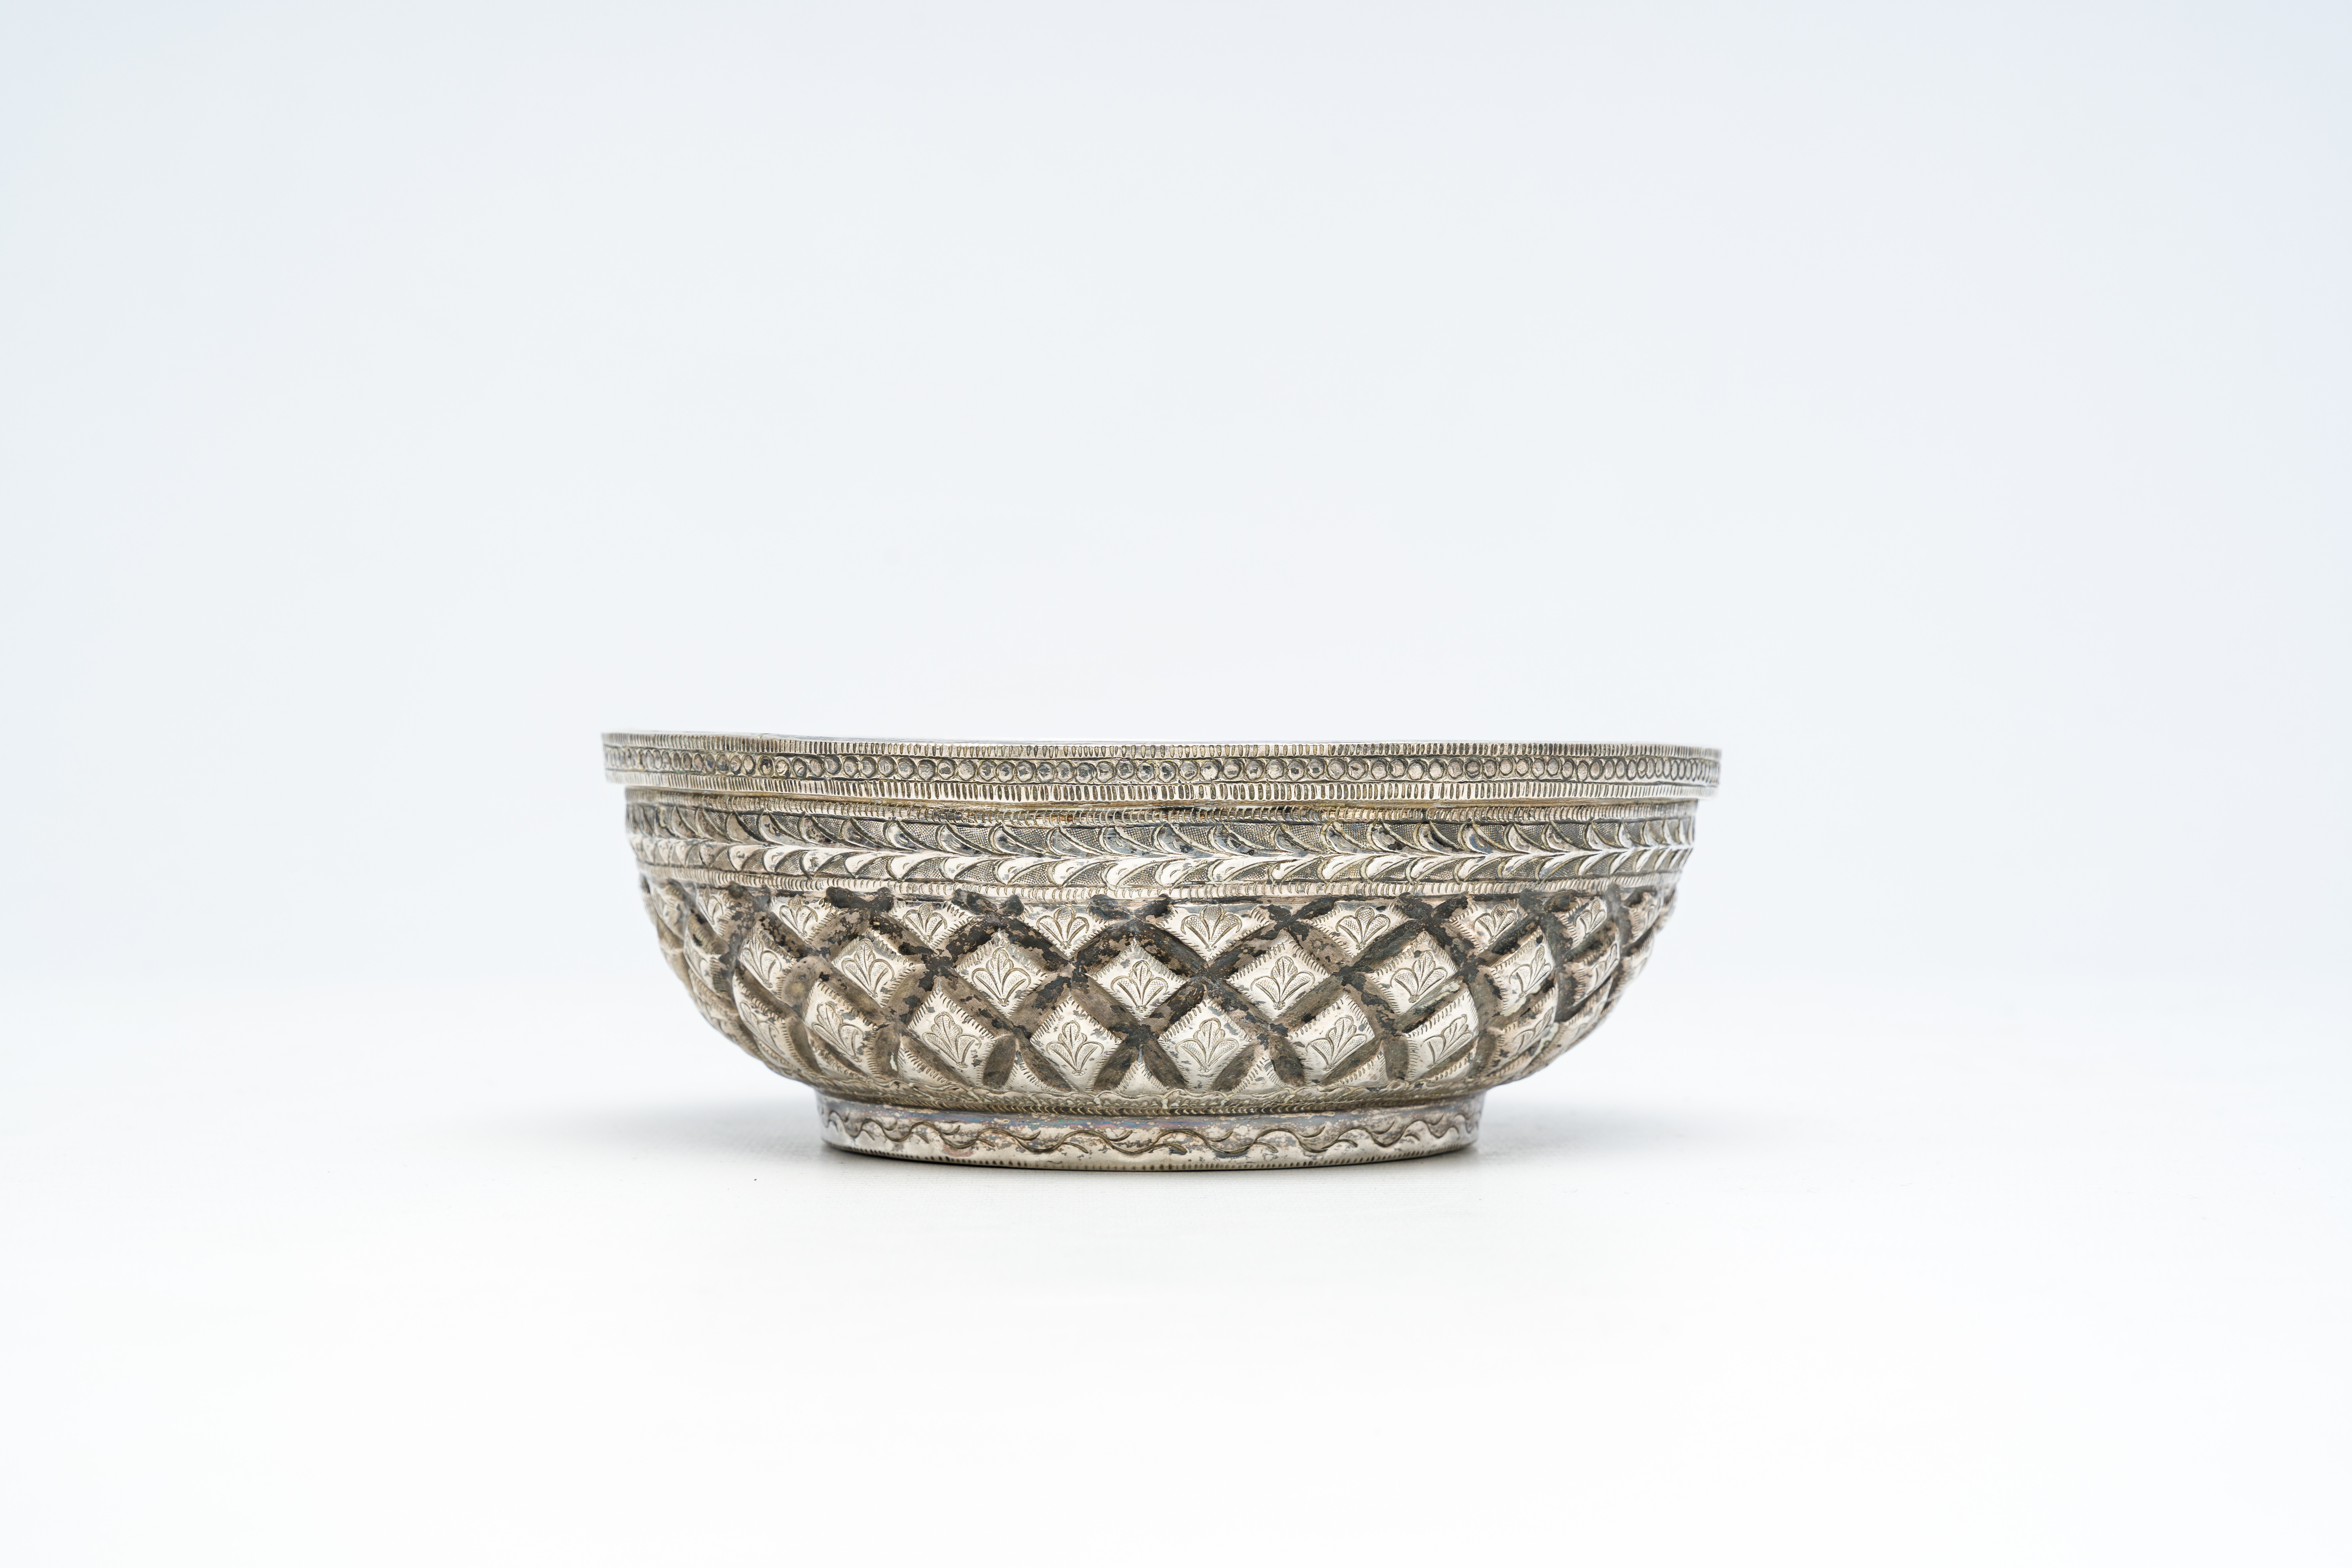 A Southeast Asian silver bowl, probably Laos or Sri Lanka, 19th/20th C. - Image 5 of 7